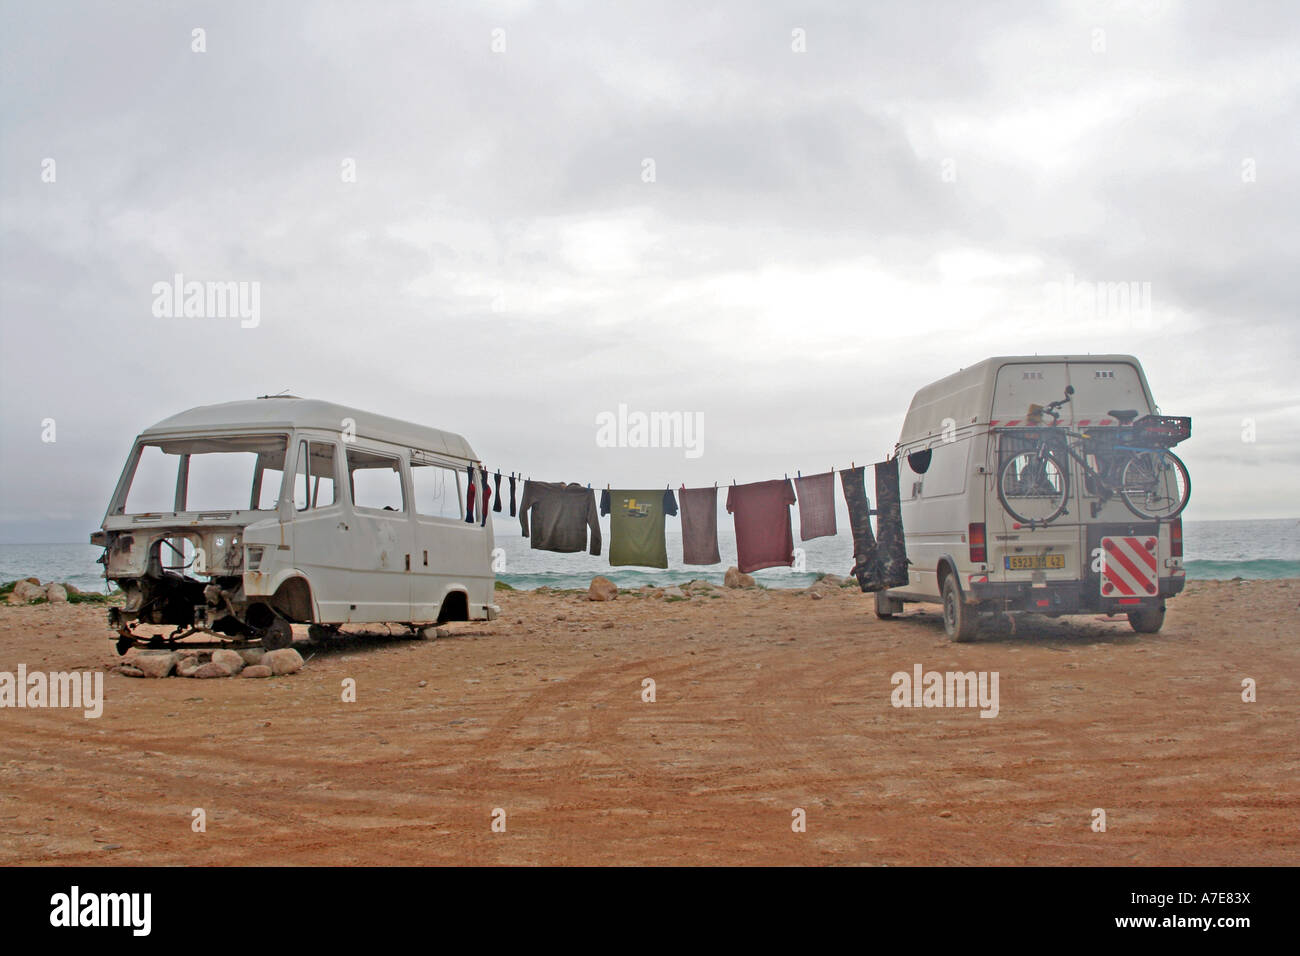 Camping life drying washing on a trist and cloudy day on the shore of Salema Bay Algarve Portugal Europe Stock Photo